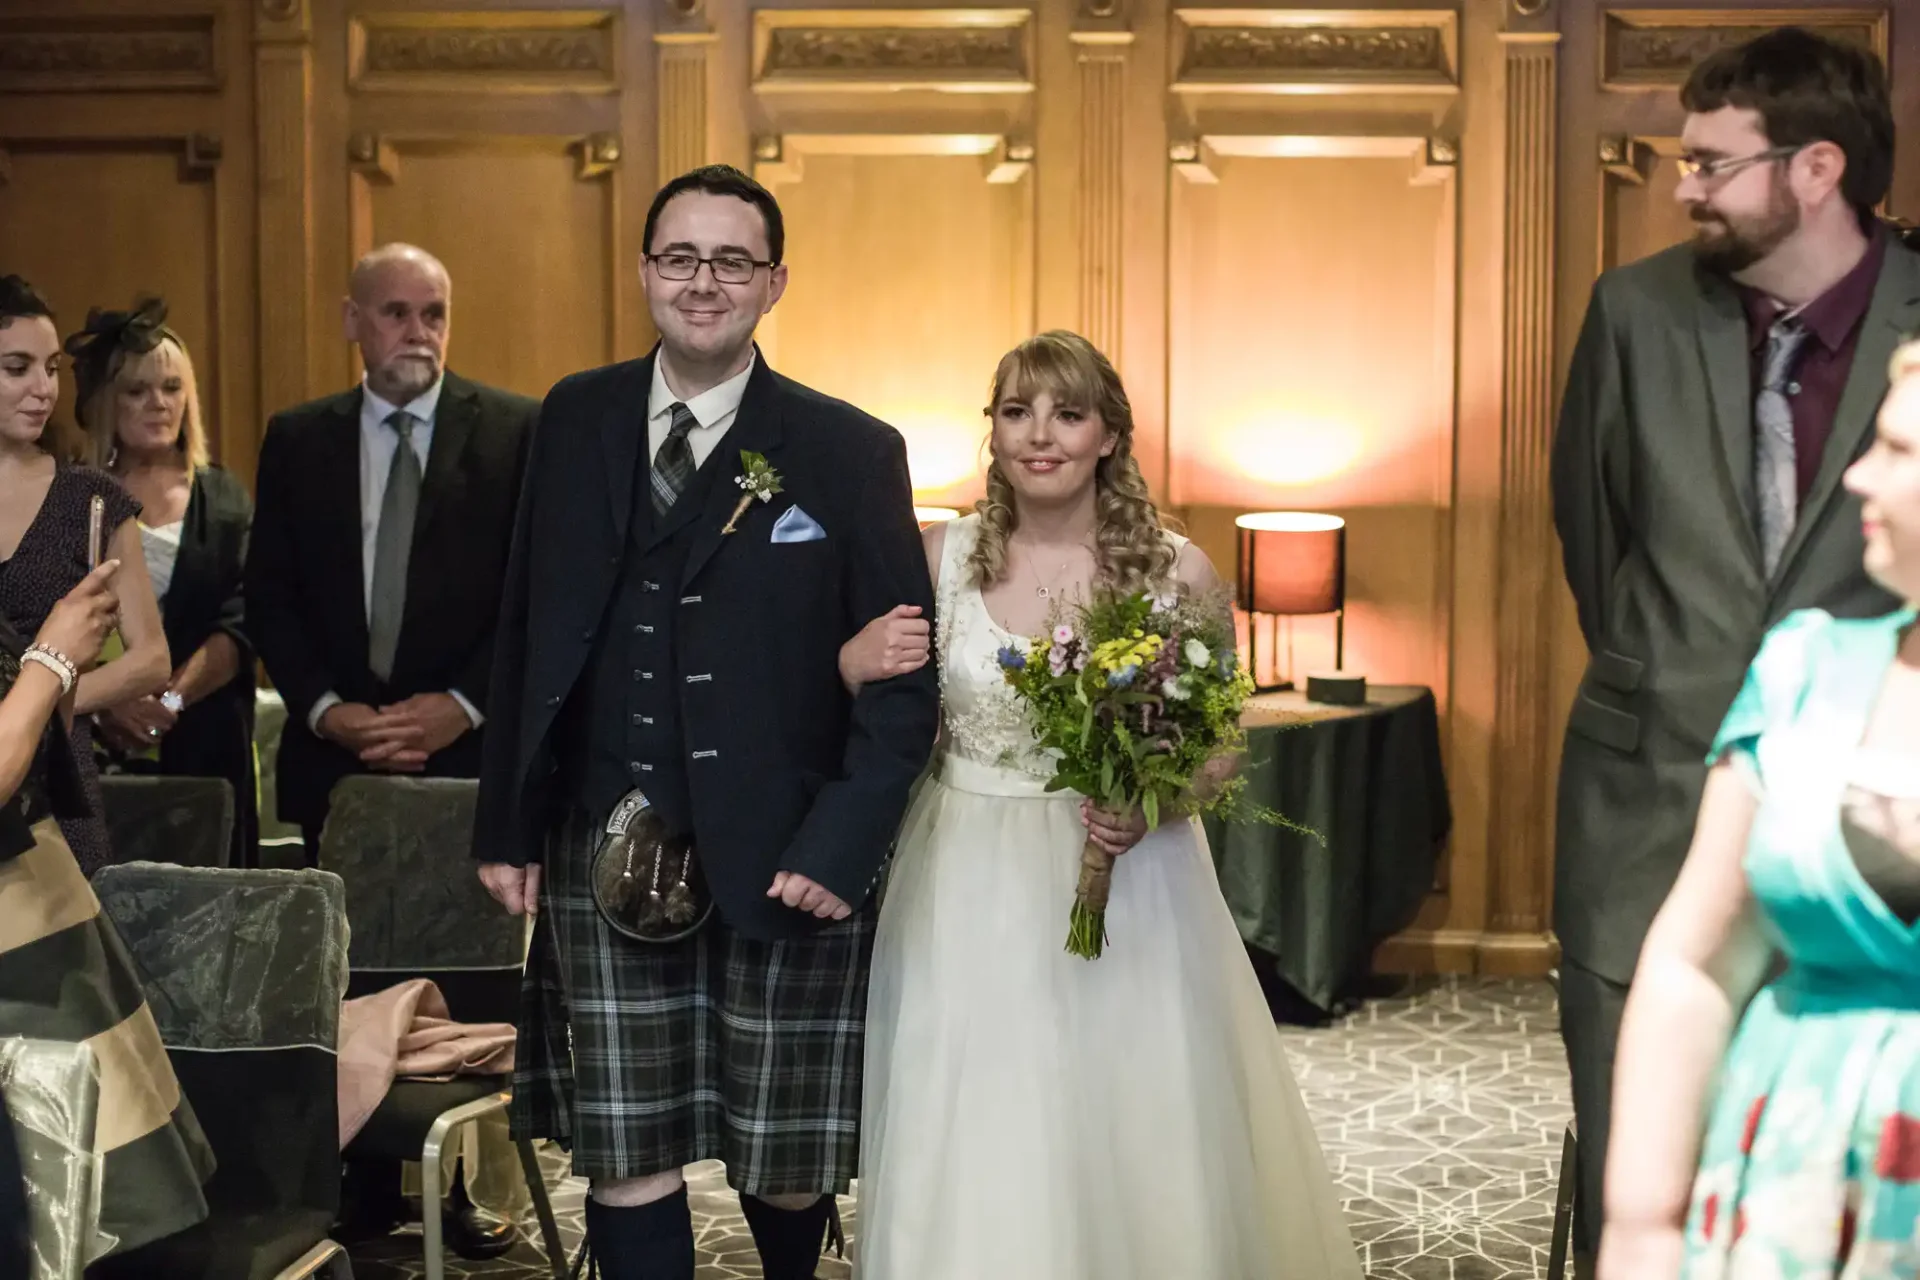 A bride and groom smile as they walk down the aisle, the groom wearing a kilt and the bride in a white dress, holding a bouquet, with guests watching.